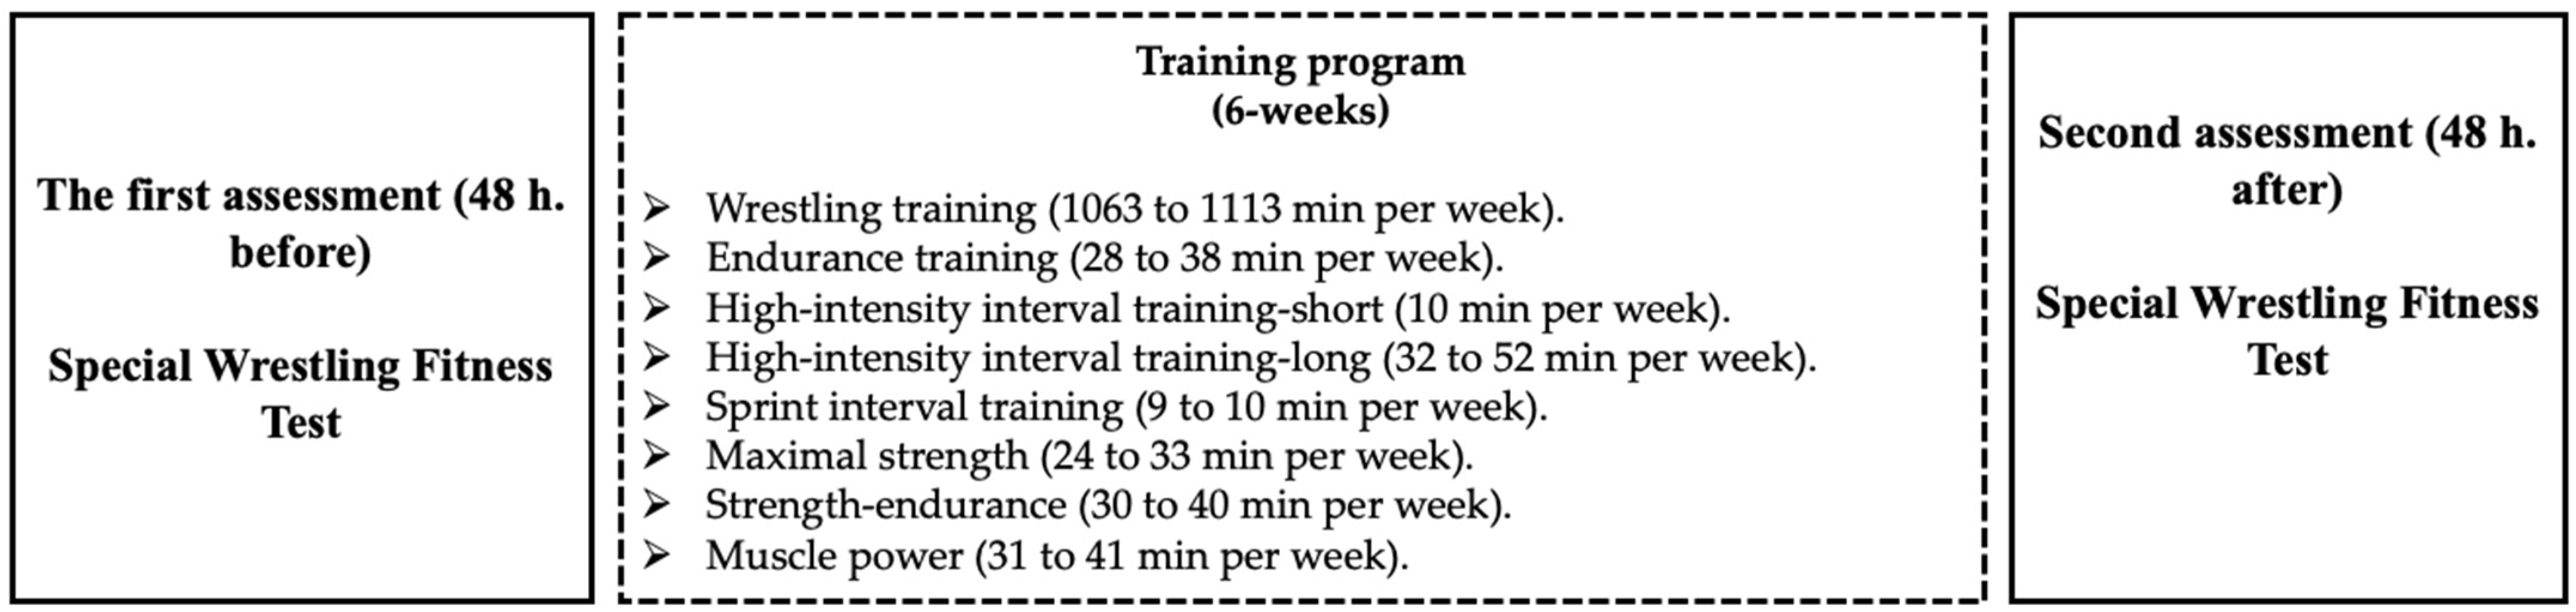 IJERPH Free Full-Text Effect of a Six Week In-Season Training Program on Wrestling-Specific Competitive Performance picture